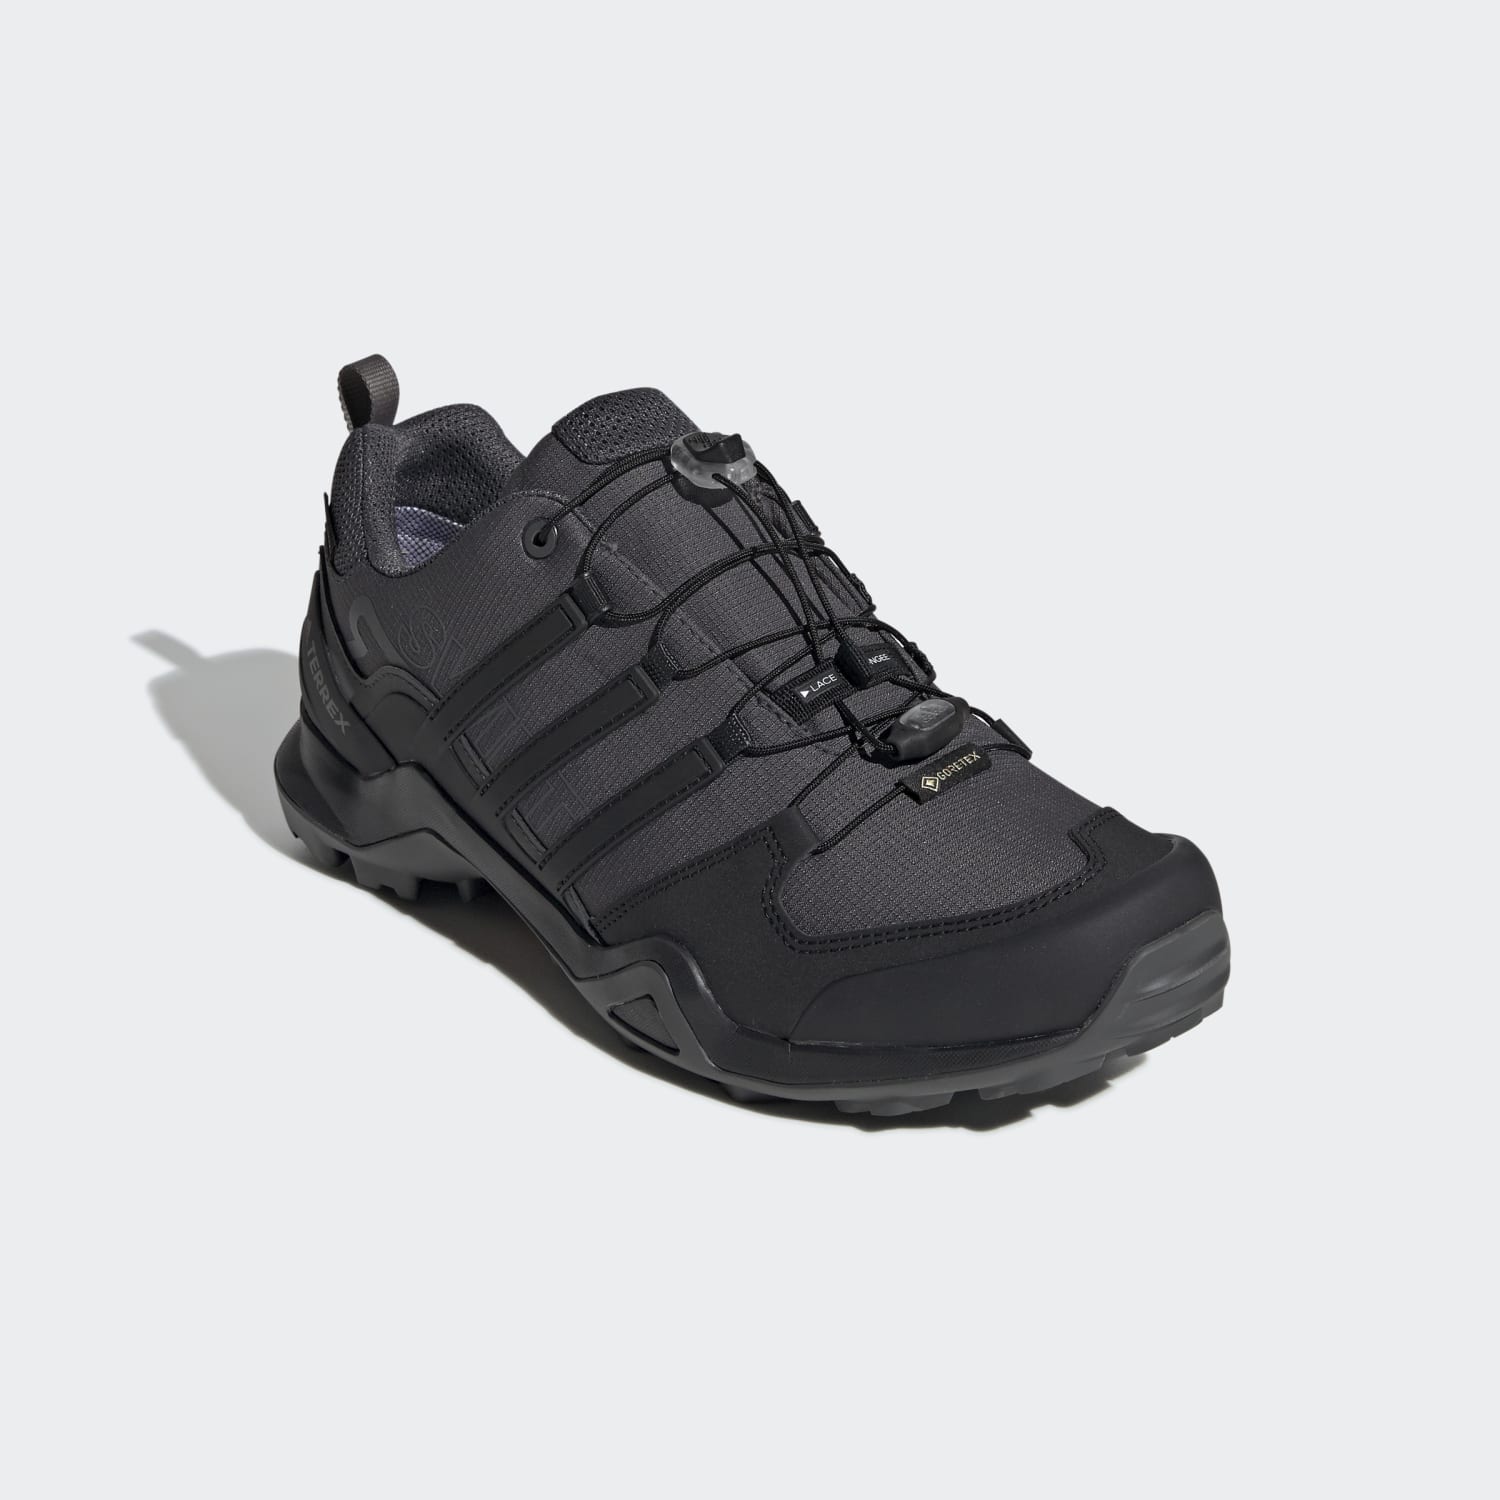 Men's adidas Terrex Swift R2 Gore-Tex Hiking Shoe in Grey Six / Core Black / Grey Four from the side view